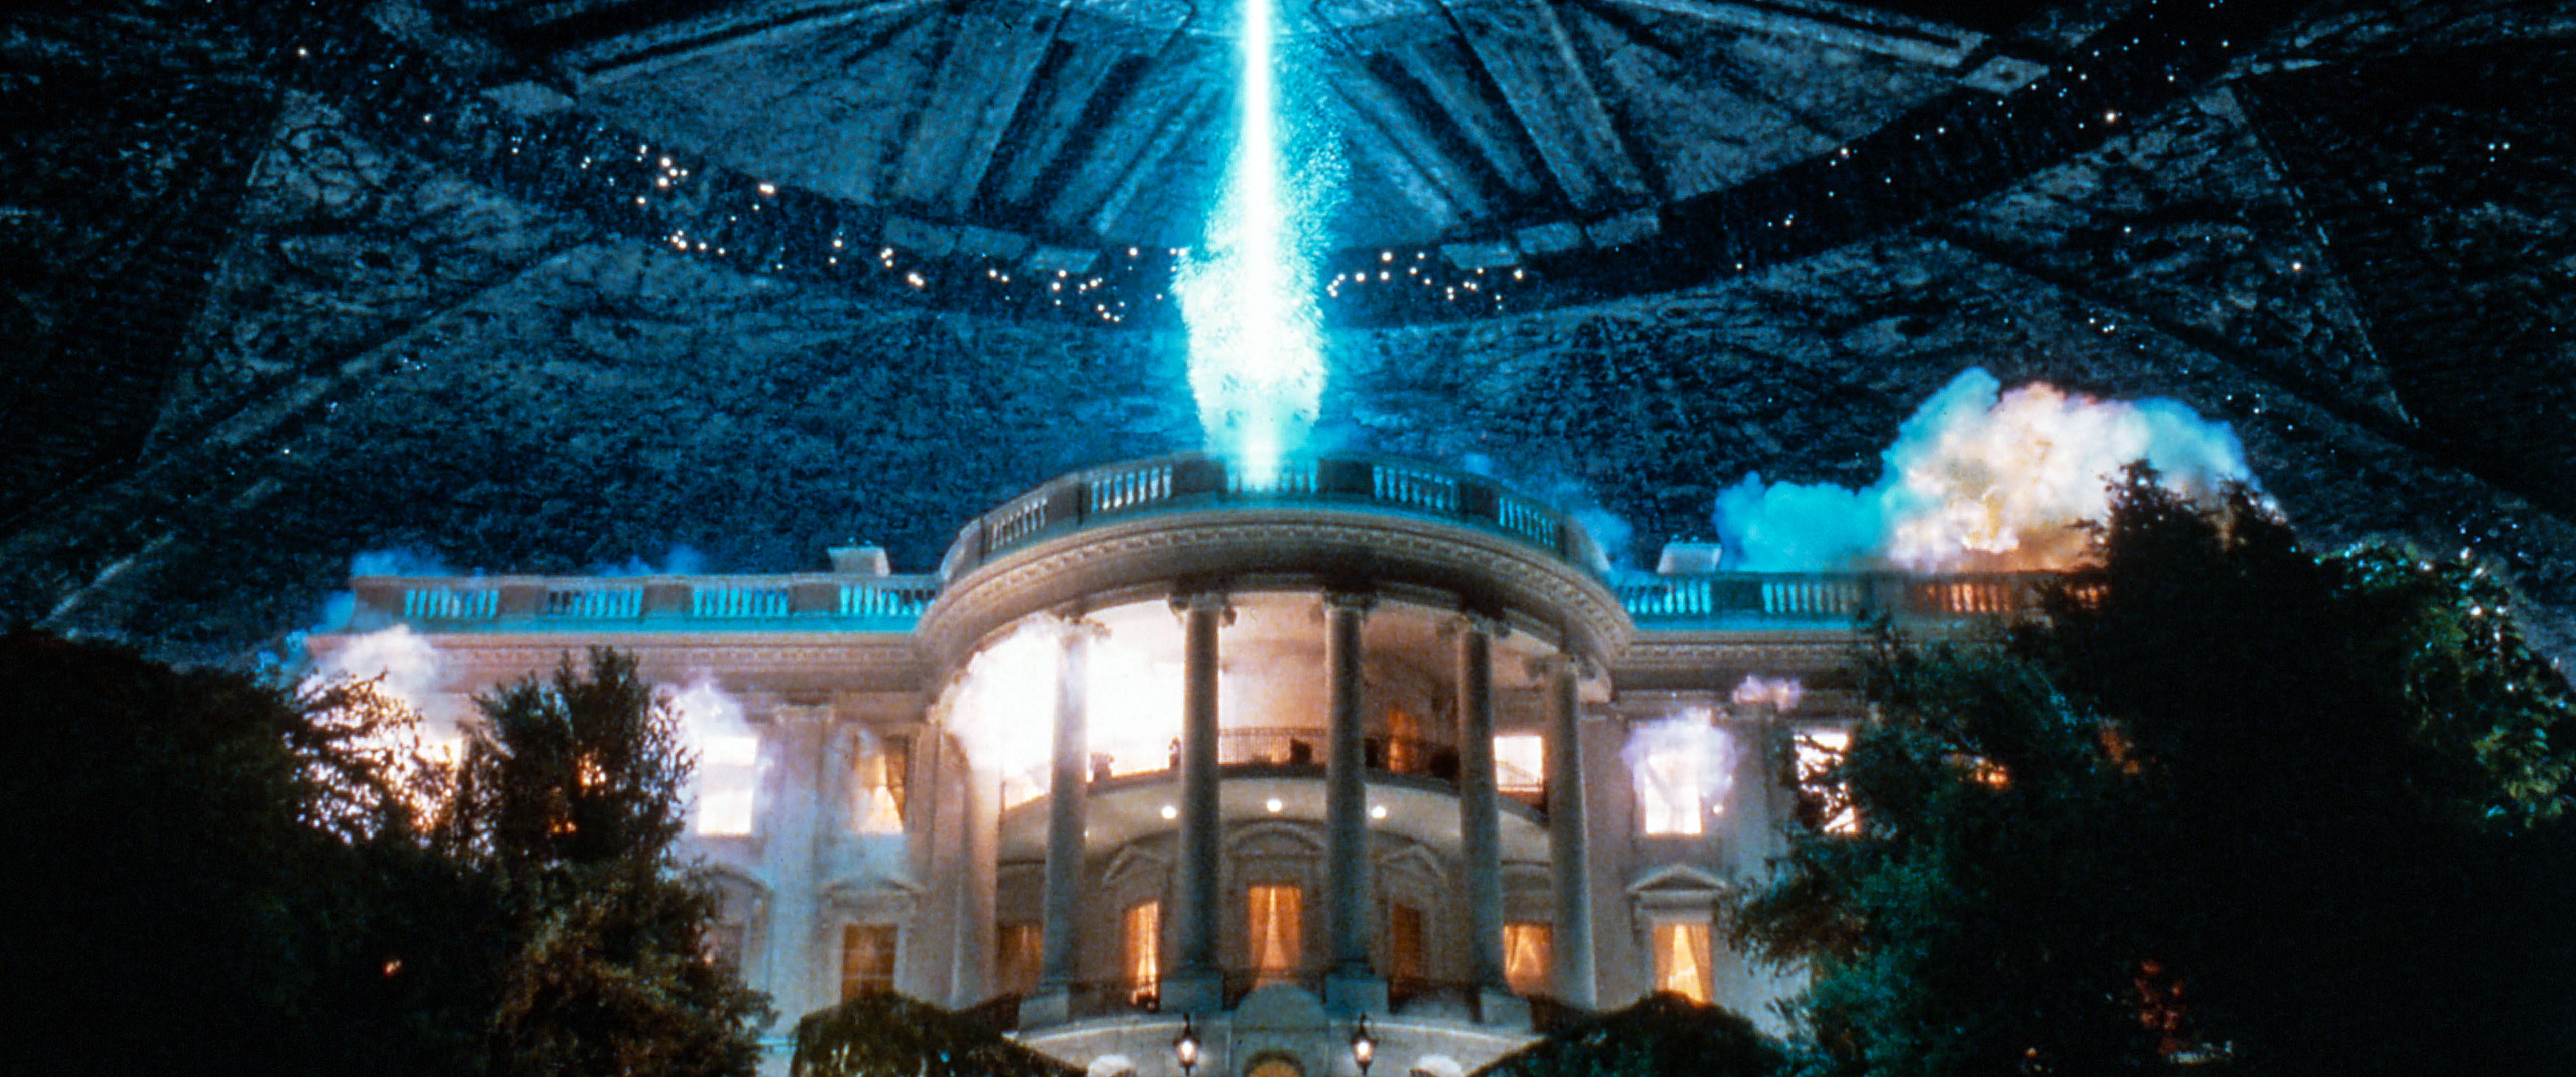 An alien spaceship hovers over the white house.